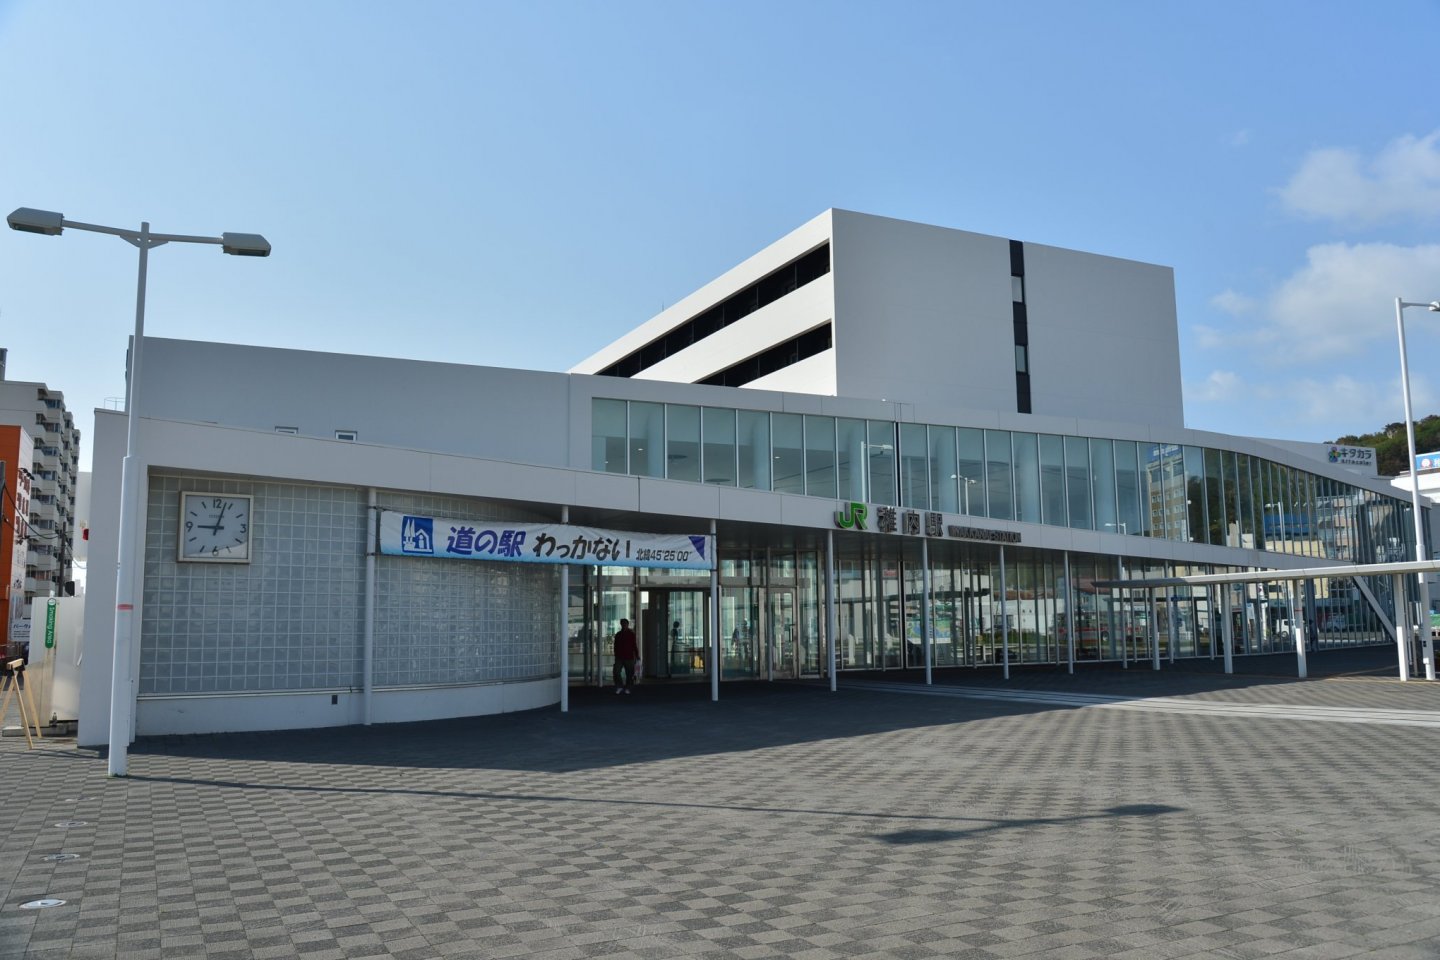 The front of the station